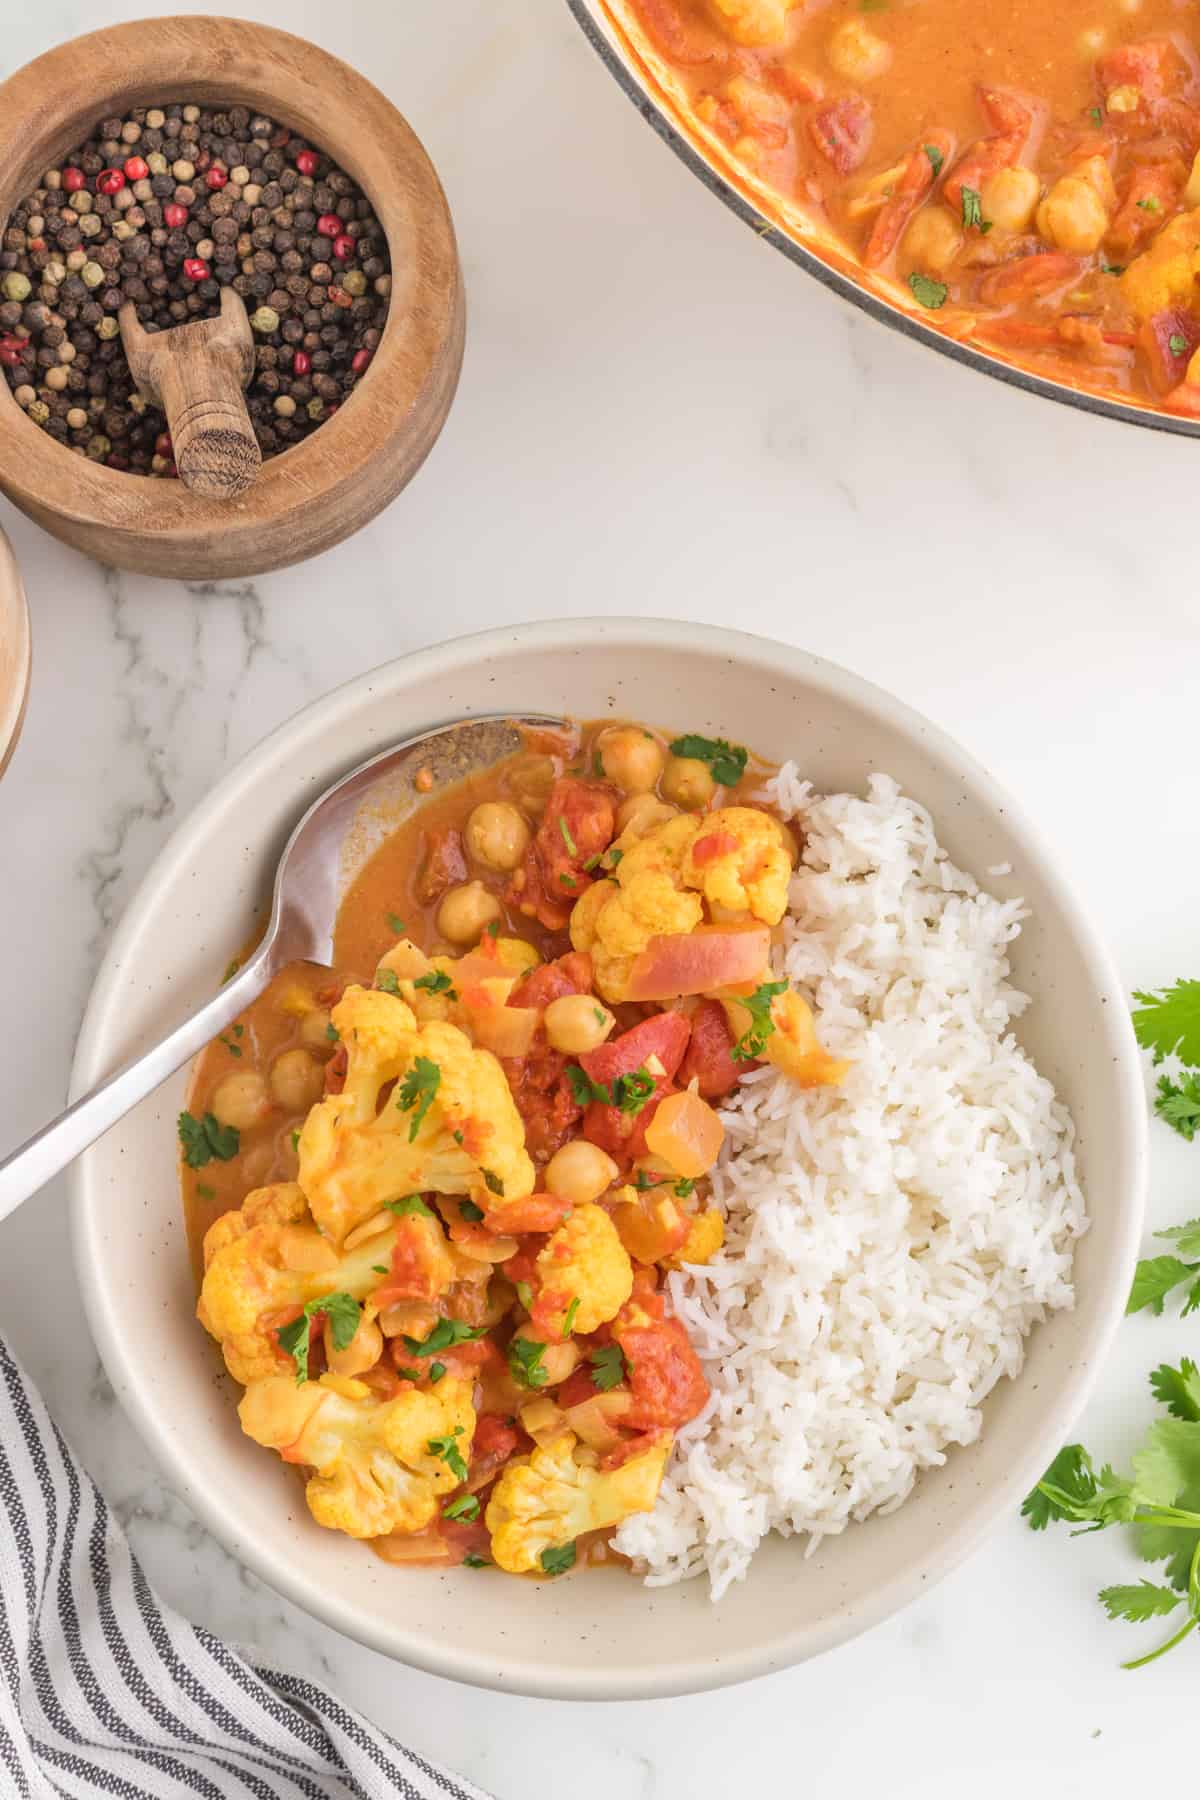 Cauliflower Chickpea Curry serves in a bowl with a spoon top view.